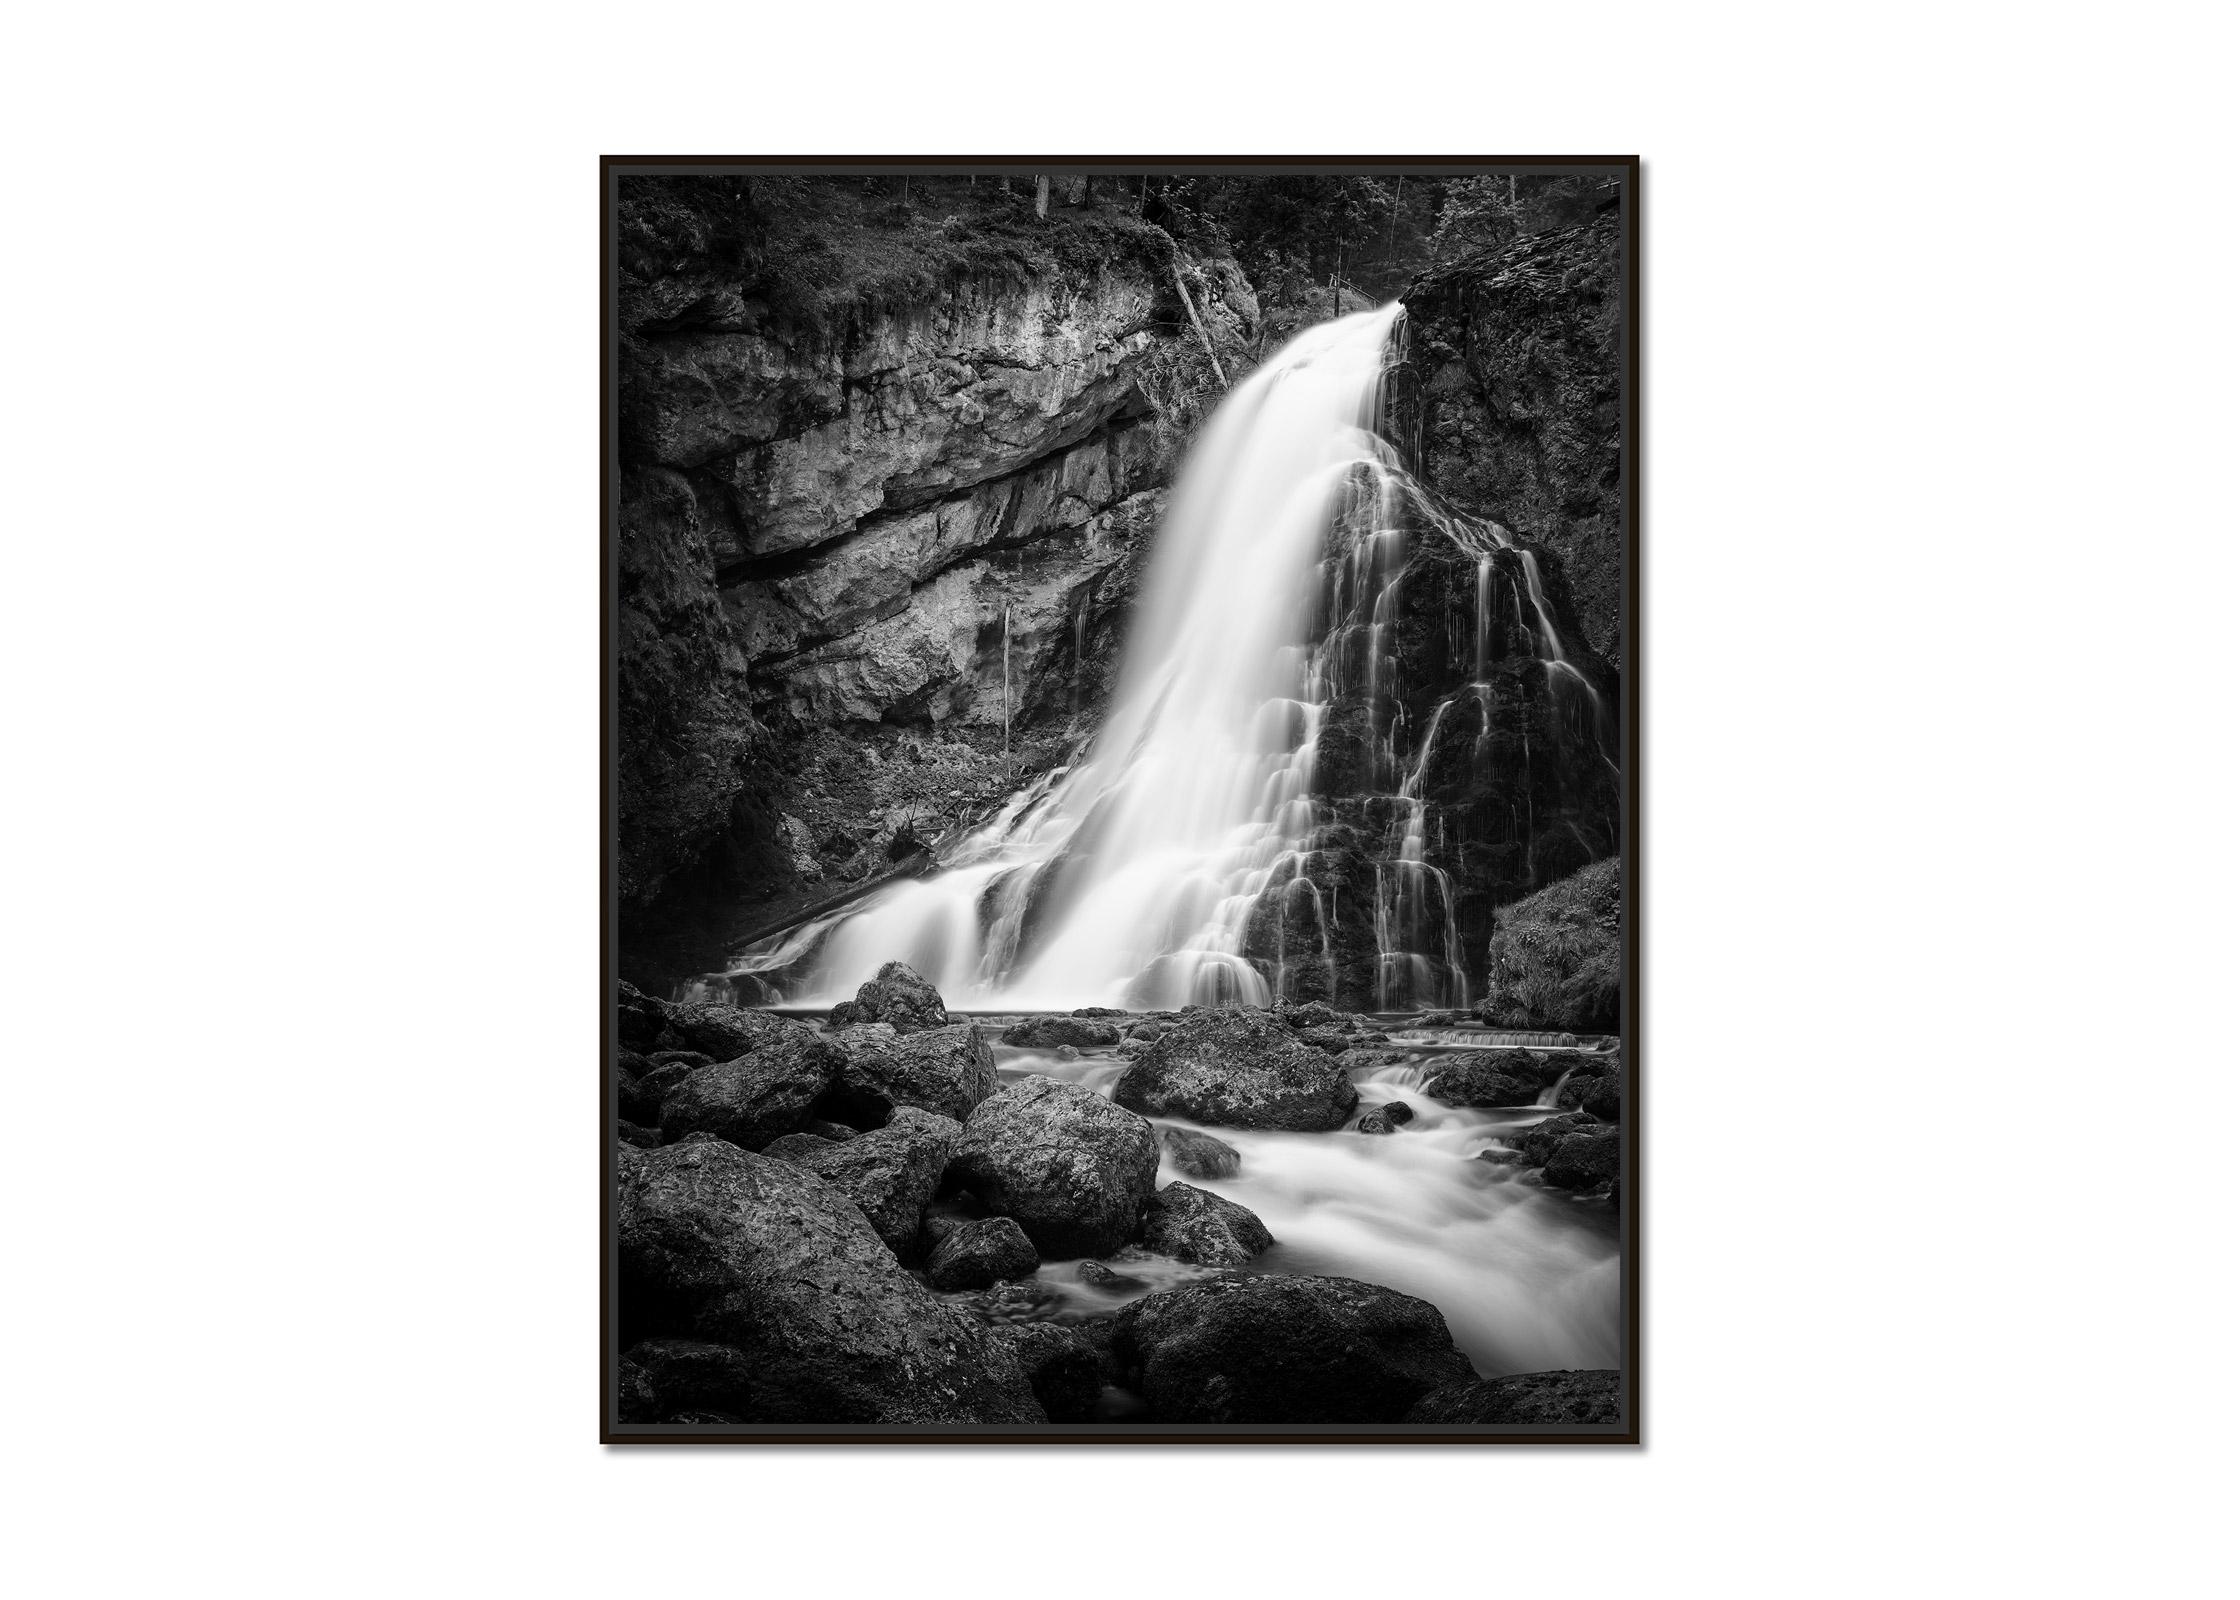 Golling Falls, Waterfall, Austria, black & white waterscape fine art photography - Photograph by Gerald Berghammer